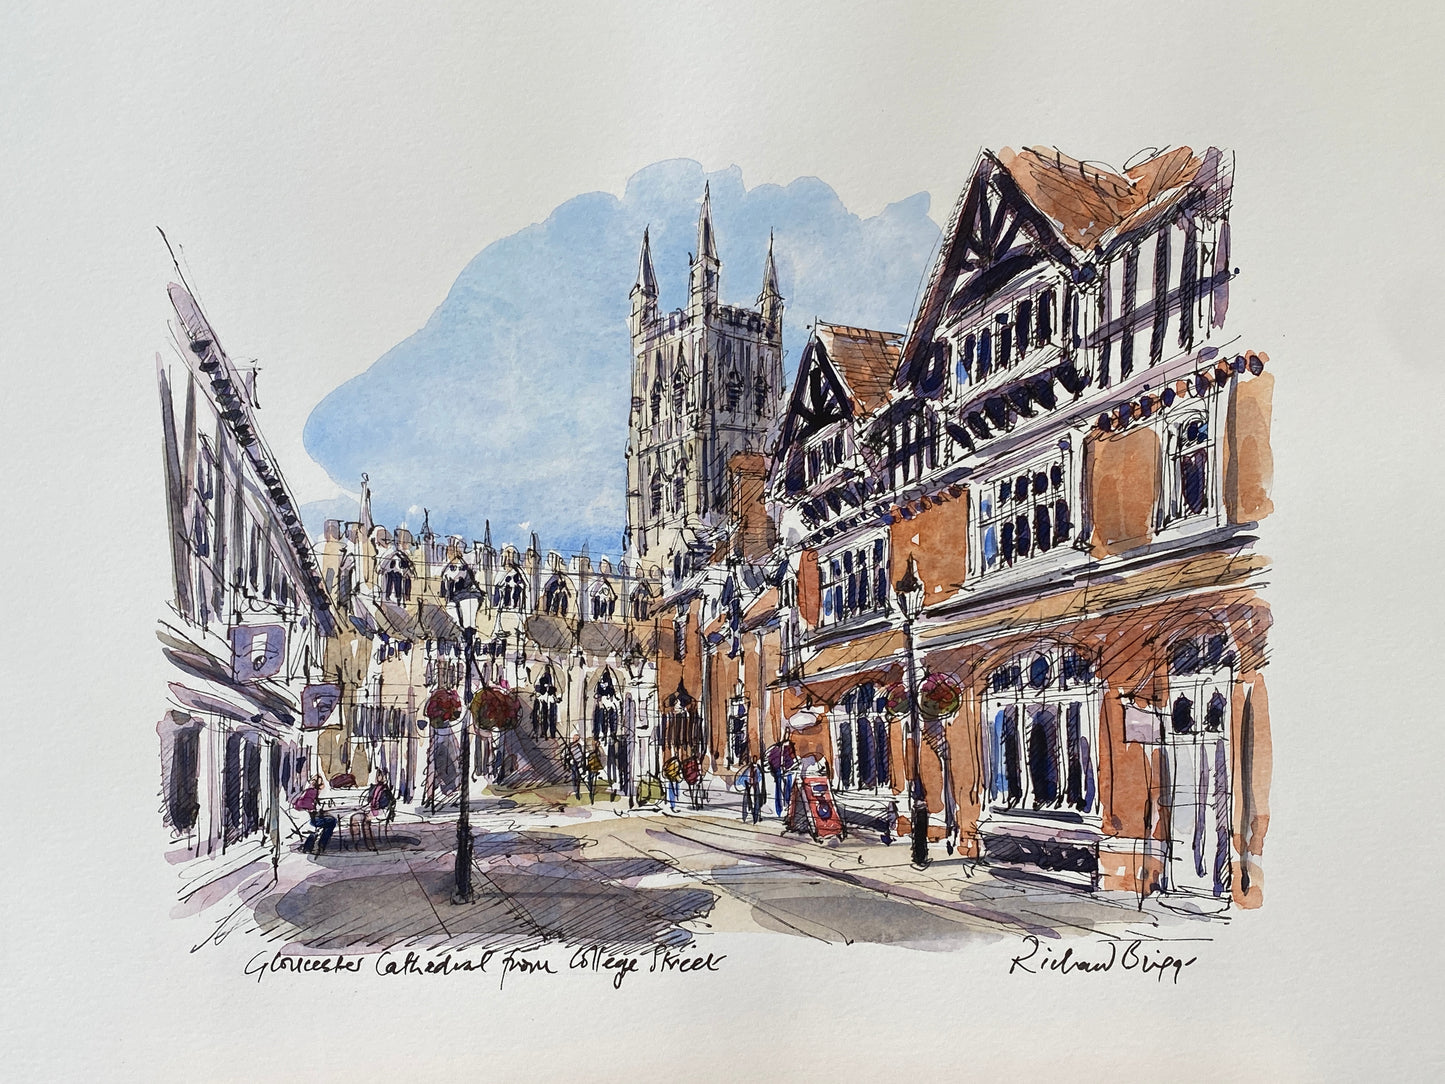 Gloucester Cathedral from College Street